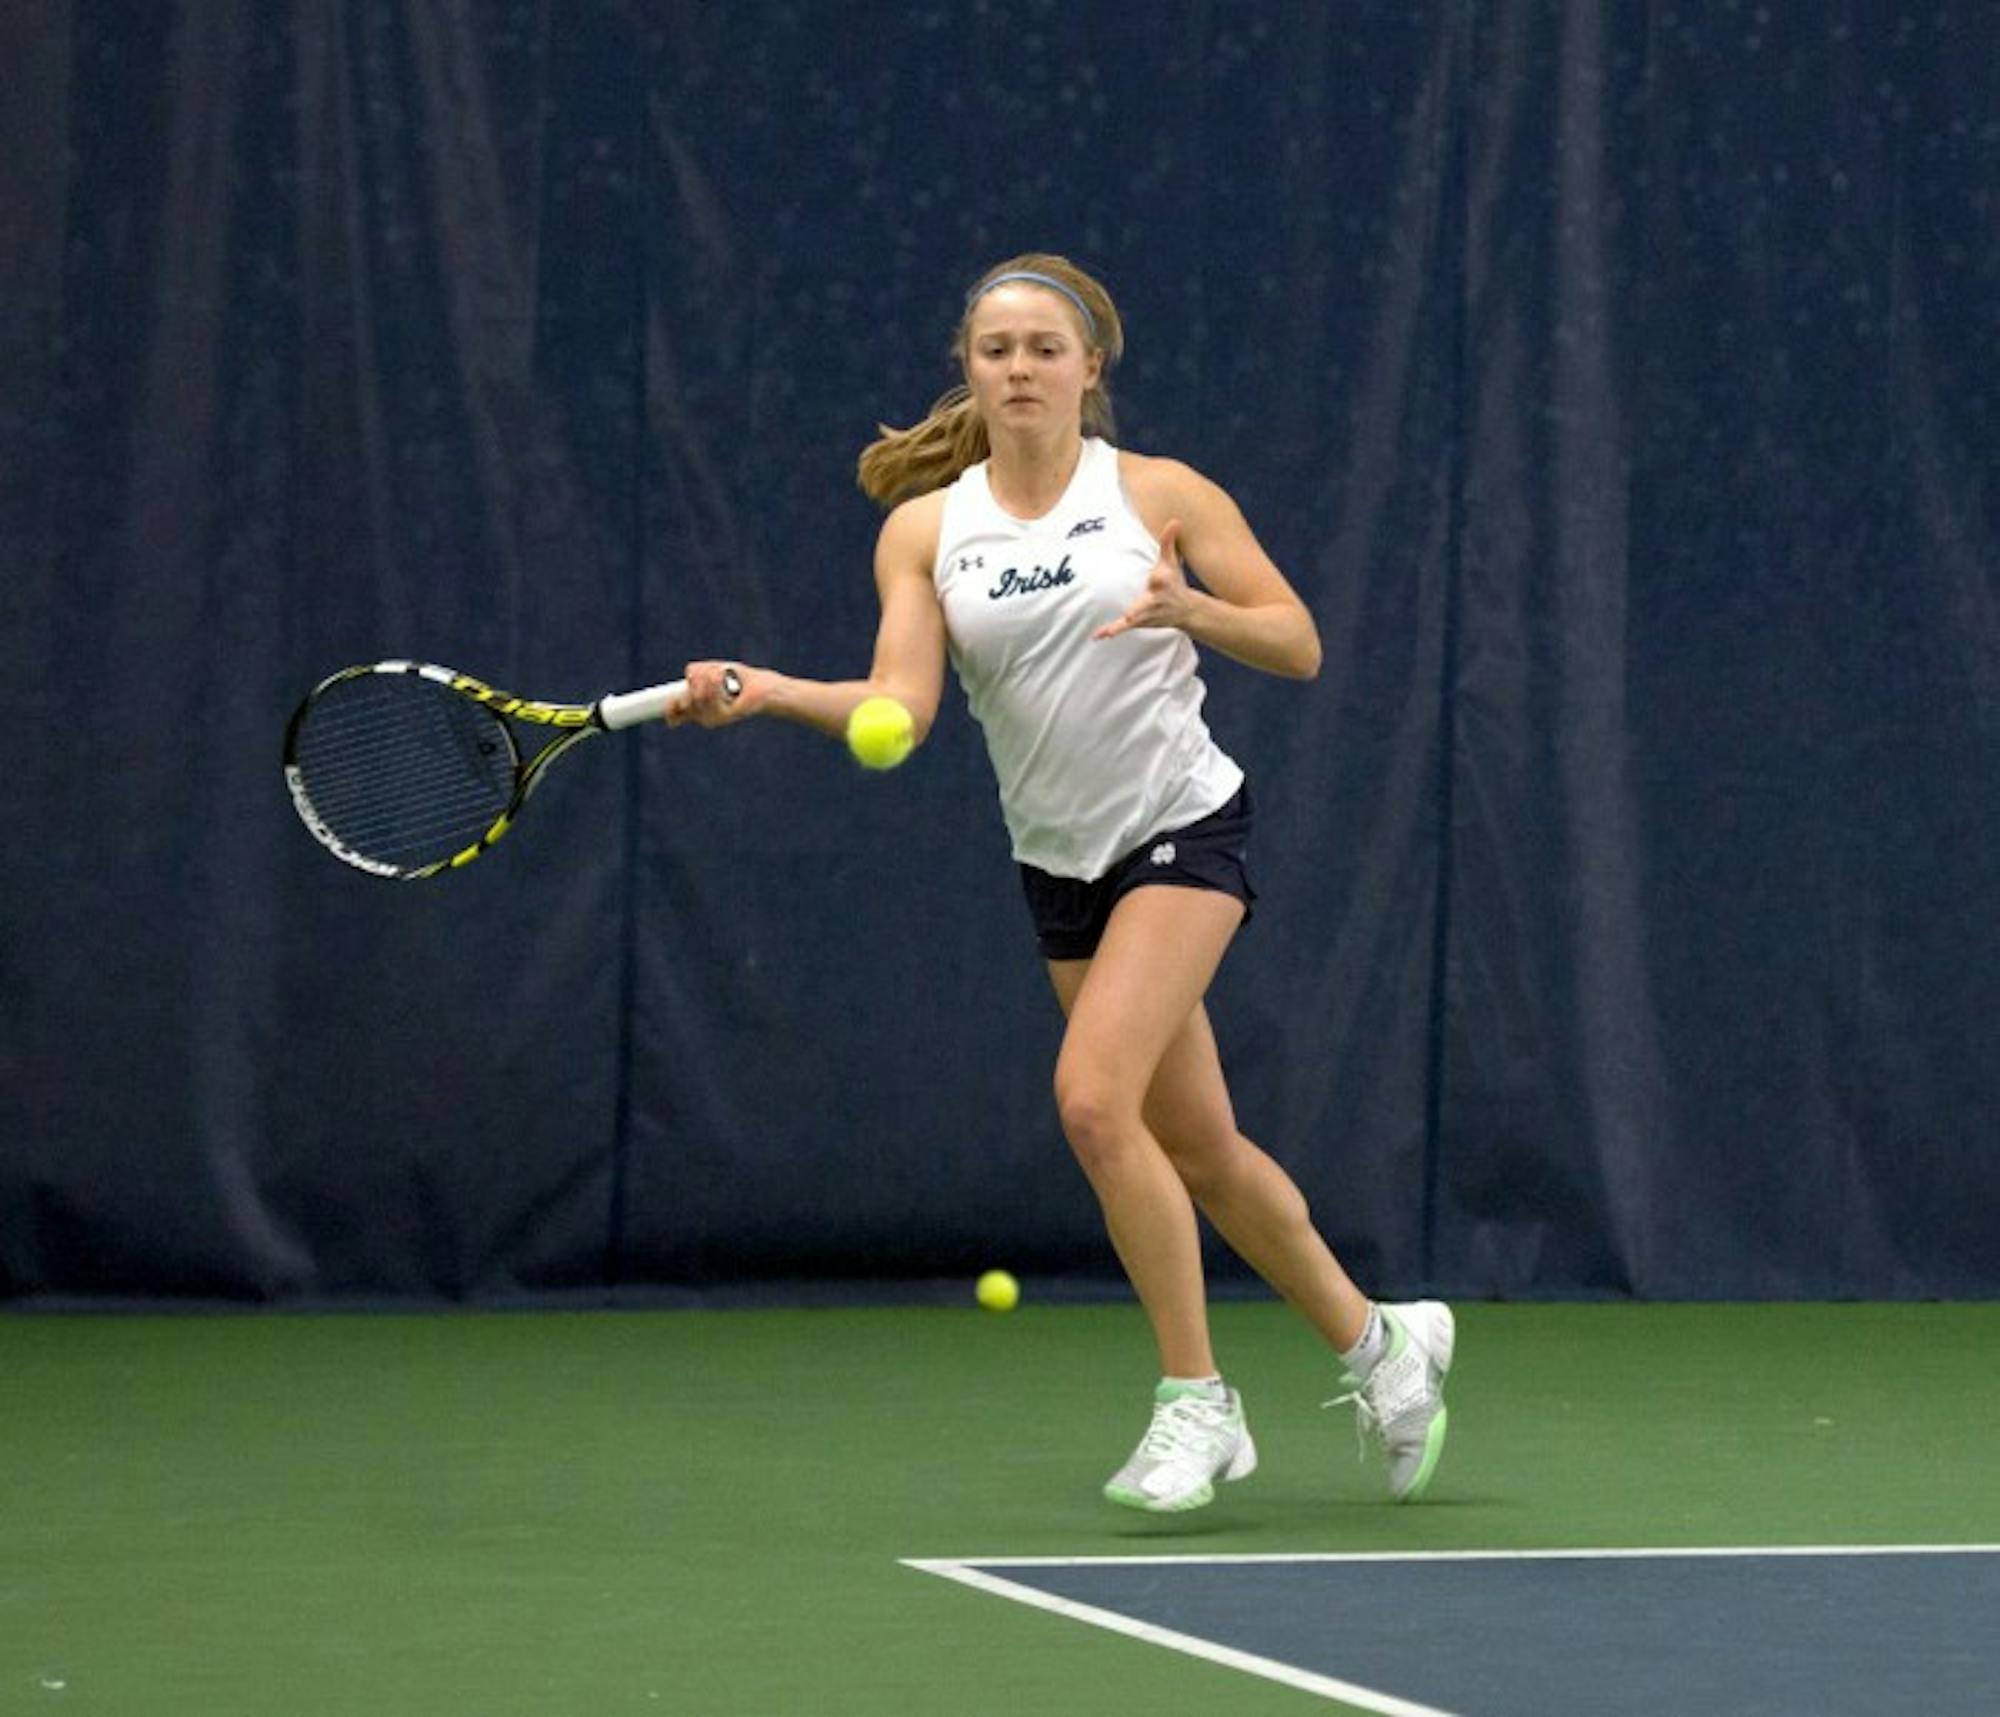 Notre Dame sophomore Monica Robinson winds up for a hit during a match against Stanford on Feb. 6 at Eck Tennis Pavilion. The Irish fell to the Cardinal, 6-1.